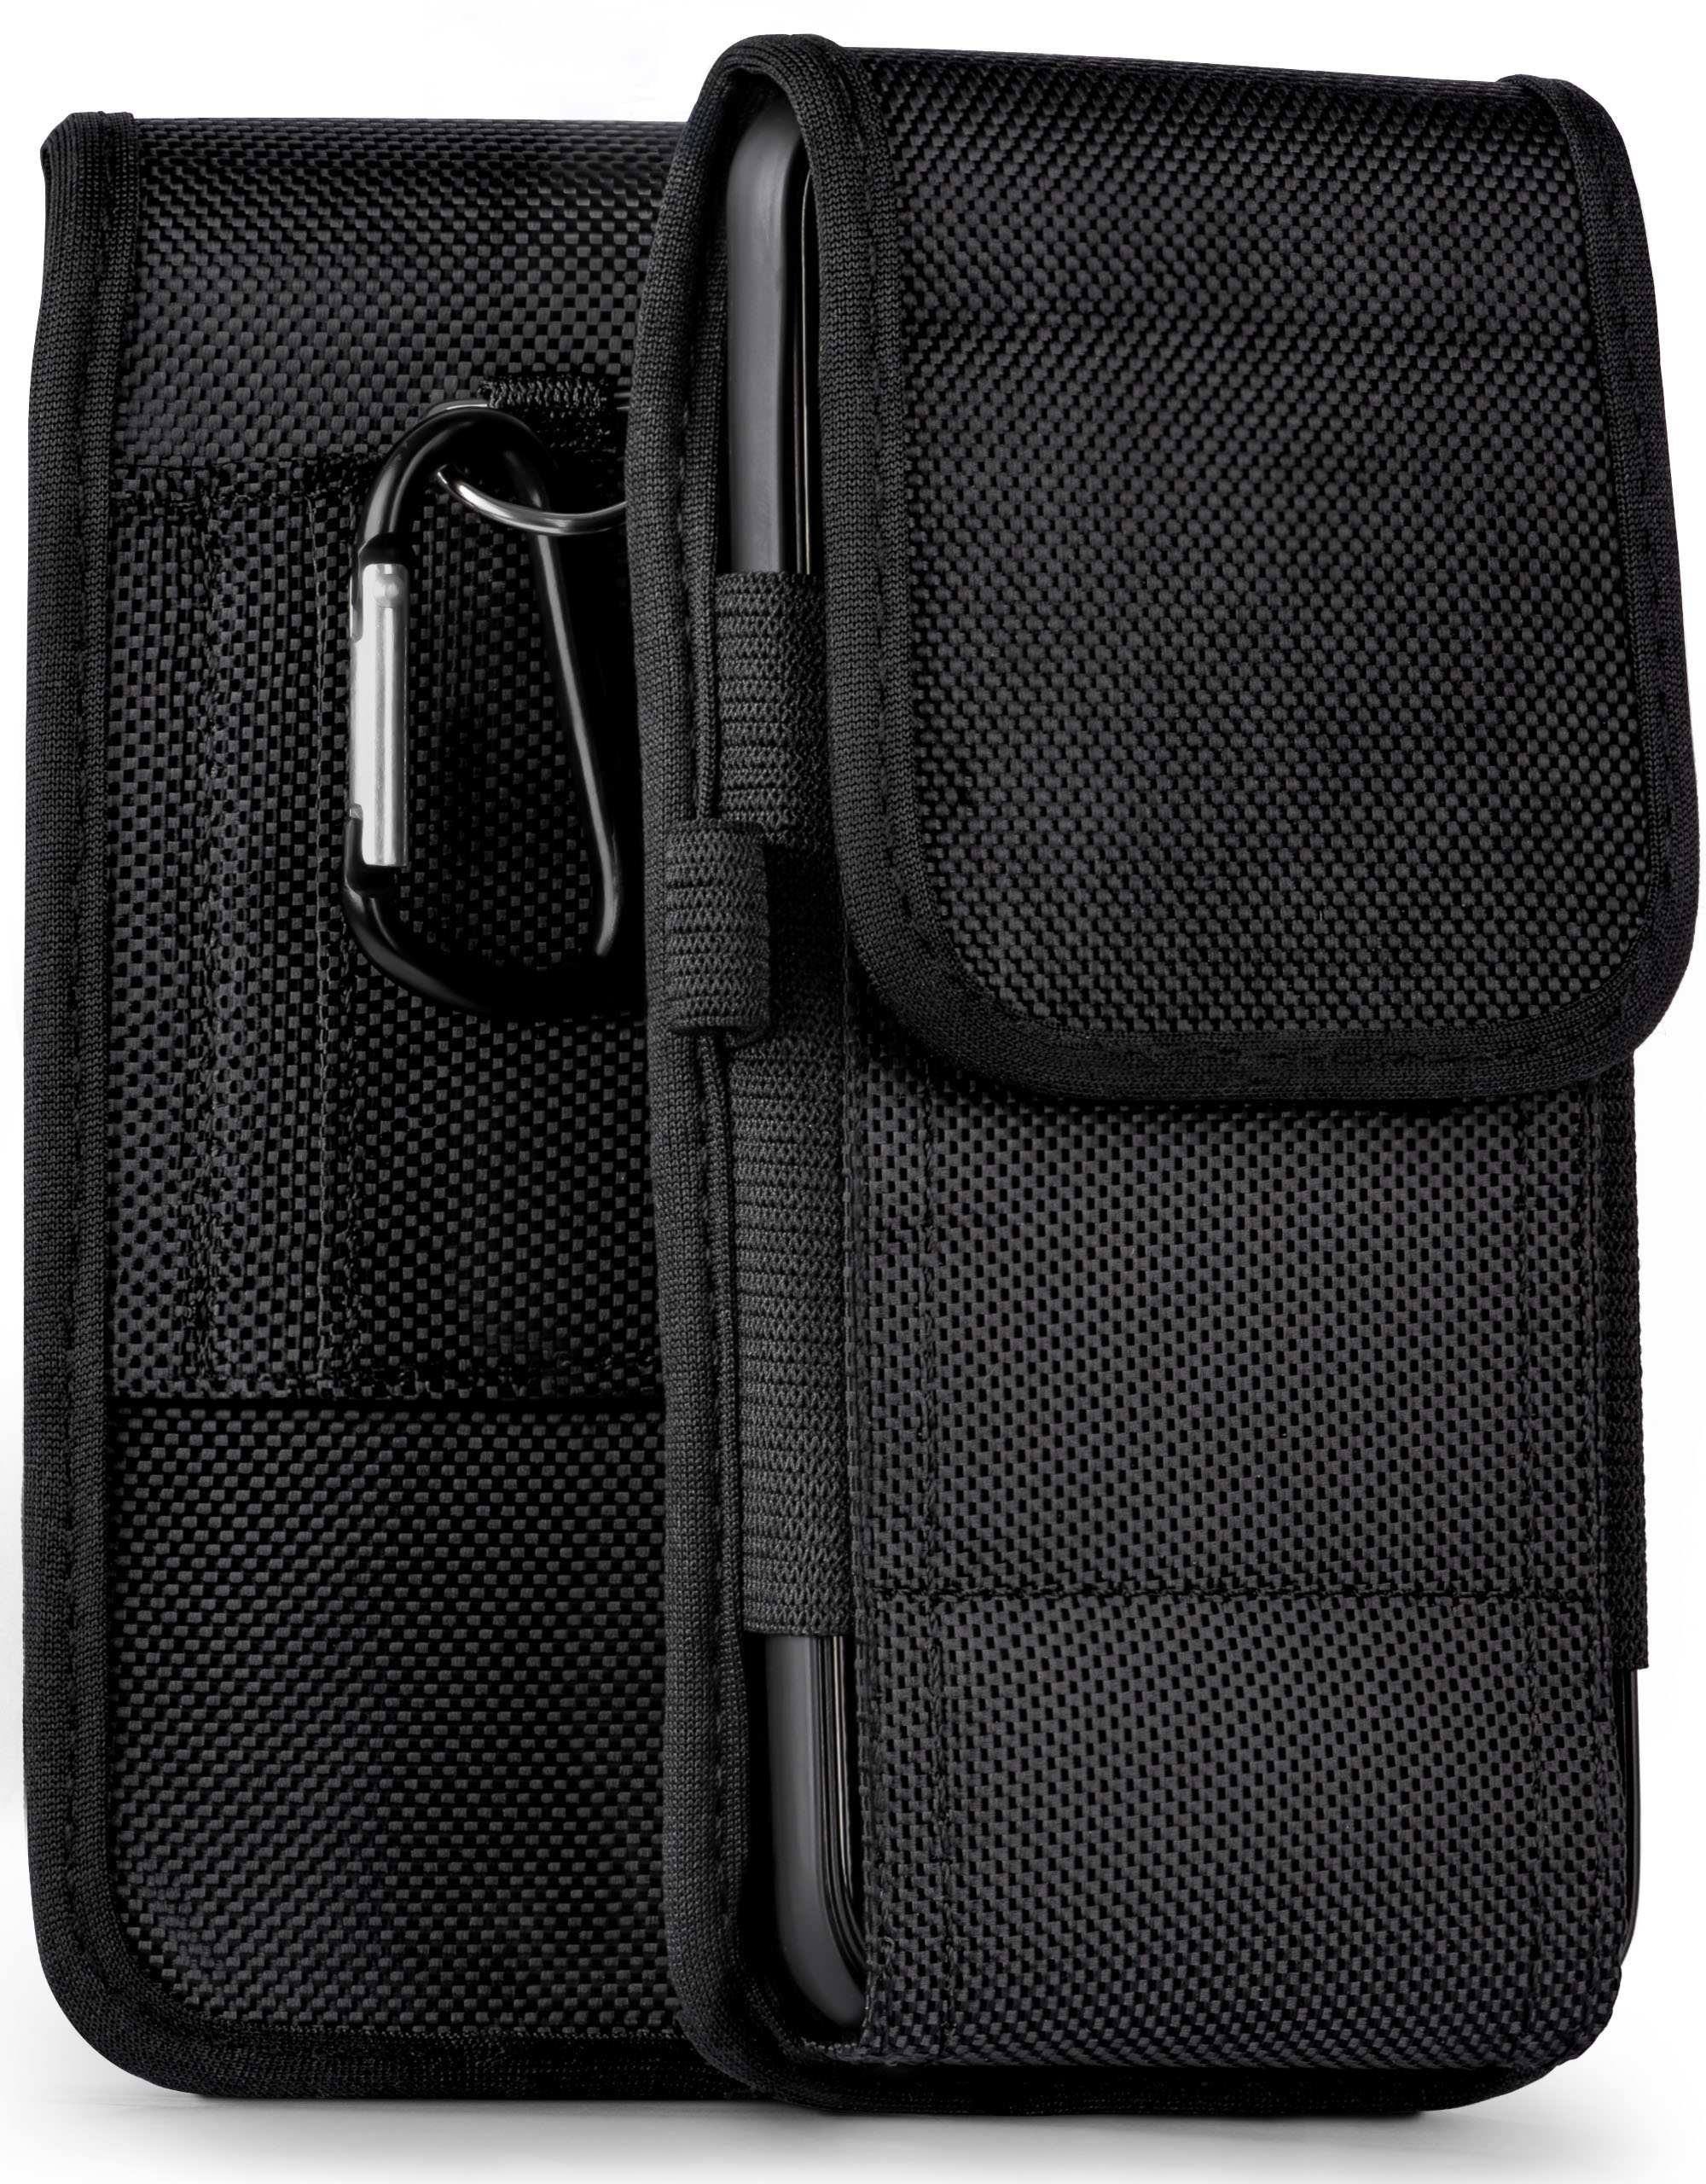 Agility MOEX 6A, Huawei, Trail Honor Holster, Case,